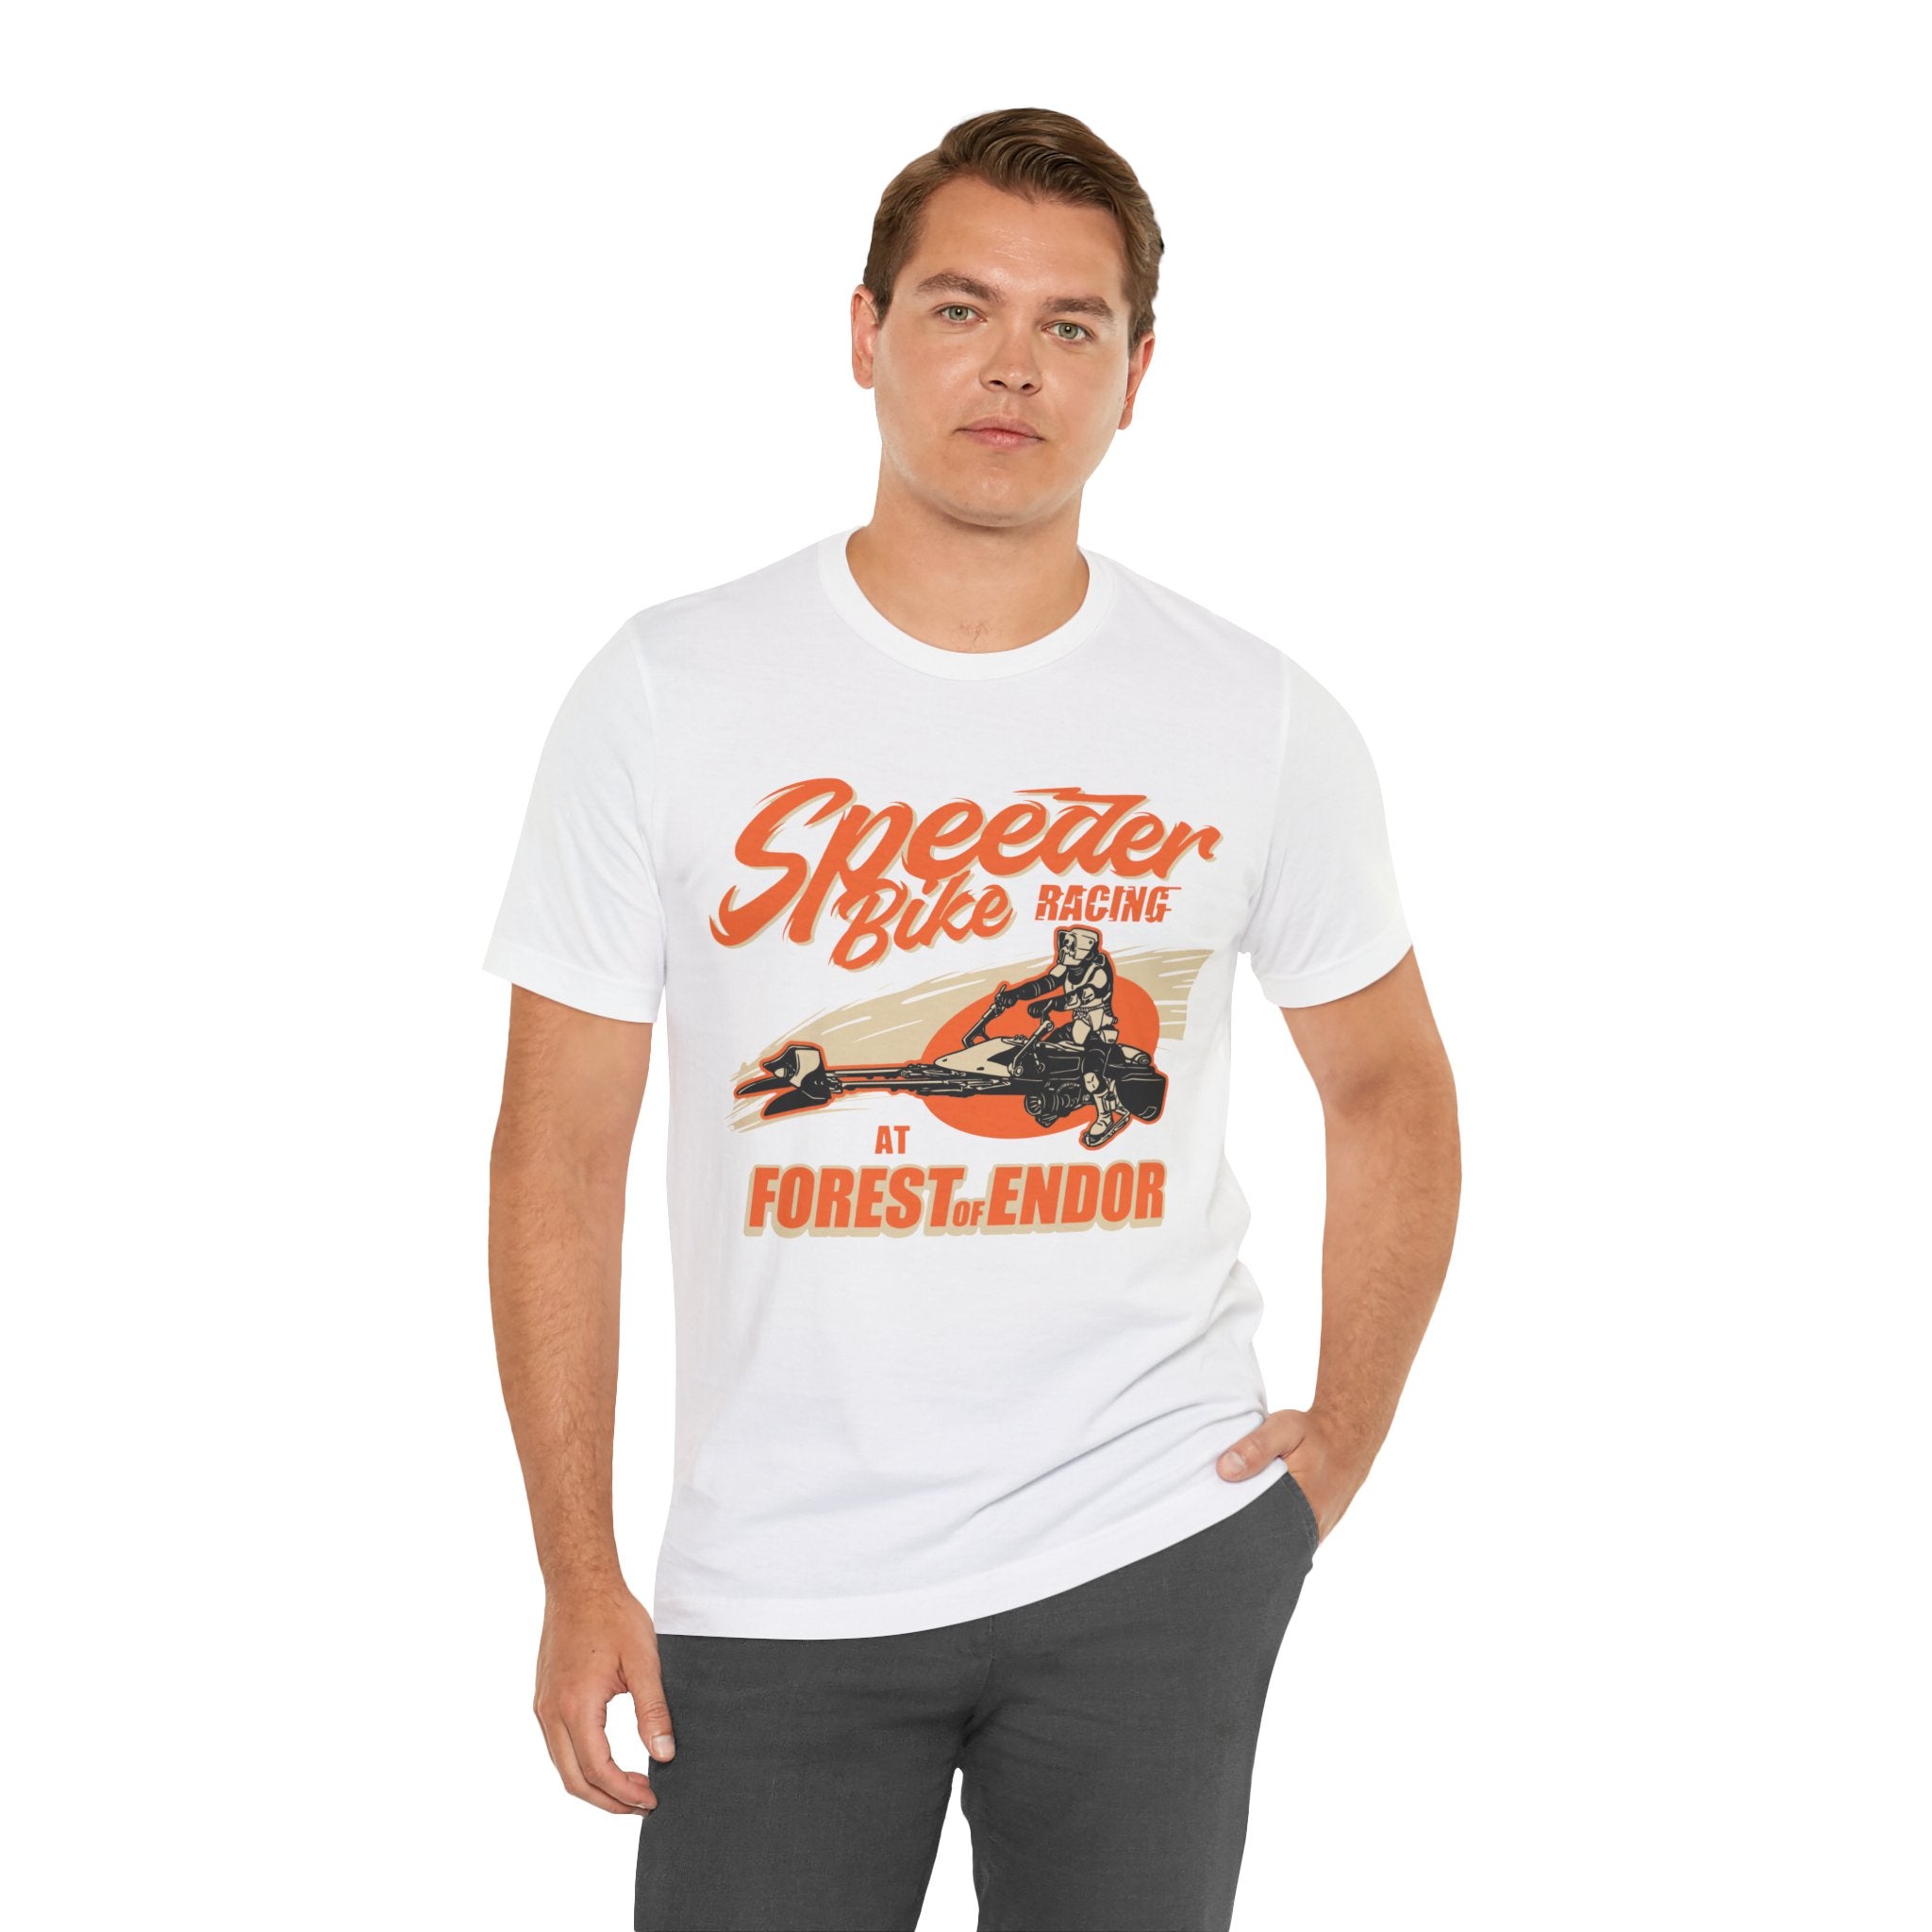 Man in a white jersey tee featuring a graphic of "Speeder Bike Racing" standing against a white background.